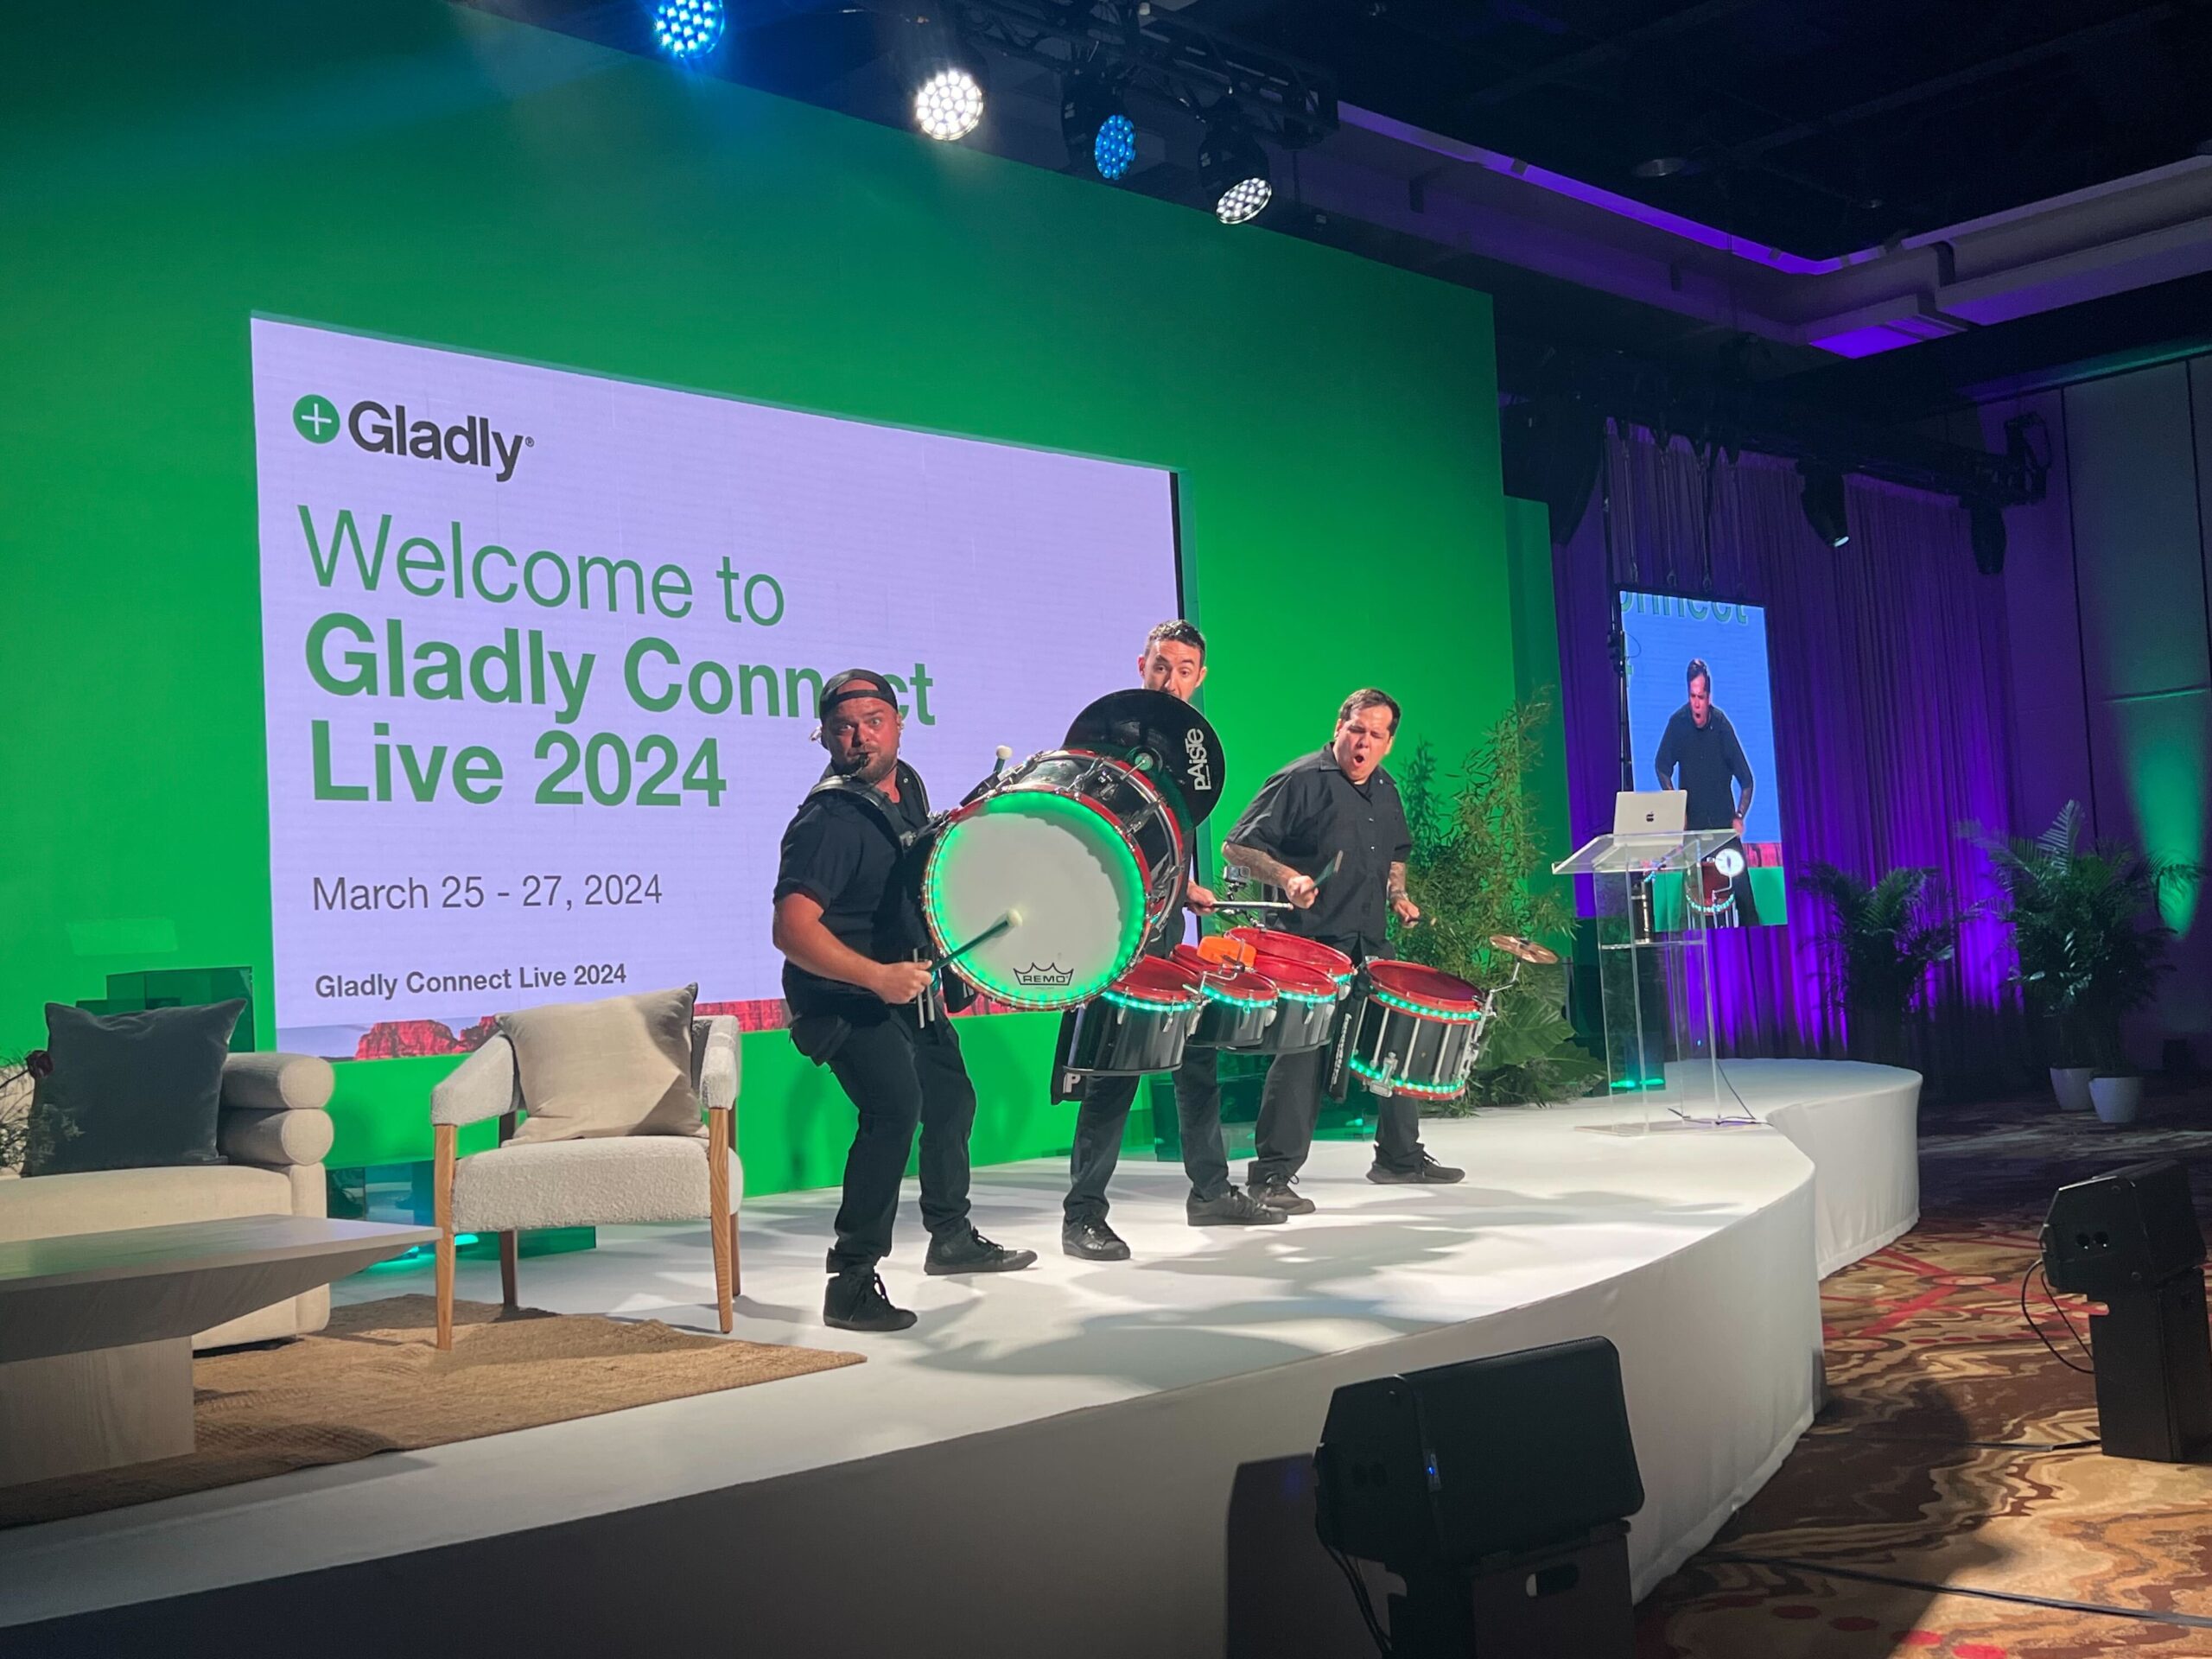 Drum line introducing Gladly Connect Live 2024